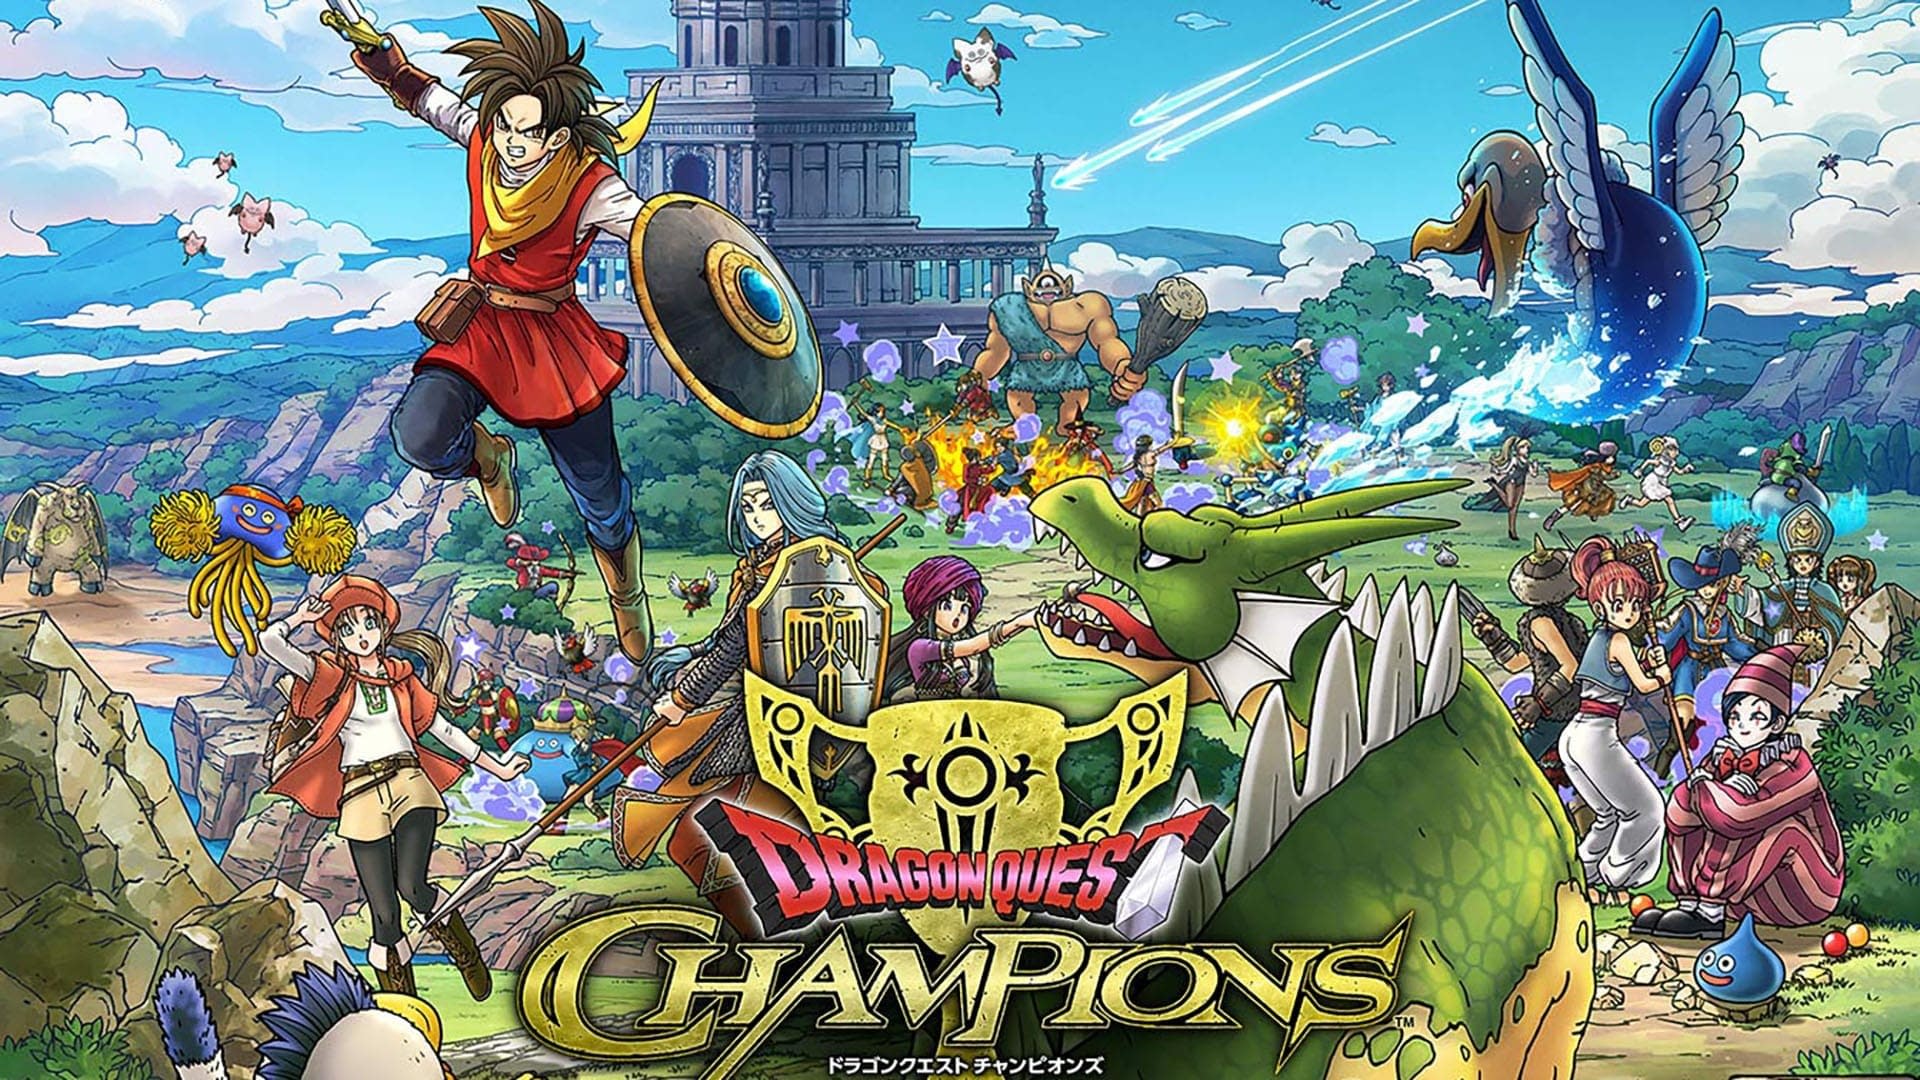 Dragon Quest Champions Announced For Mobile Devices